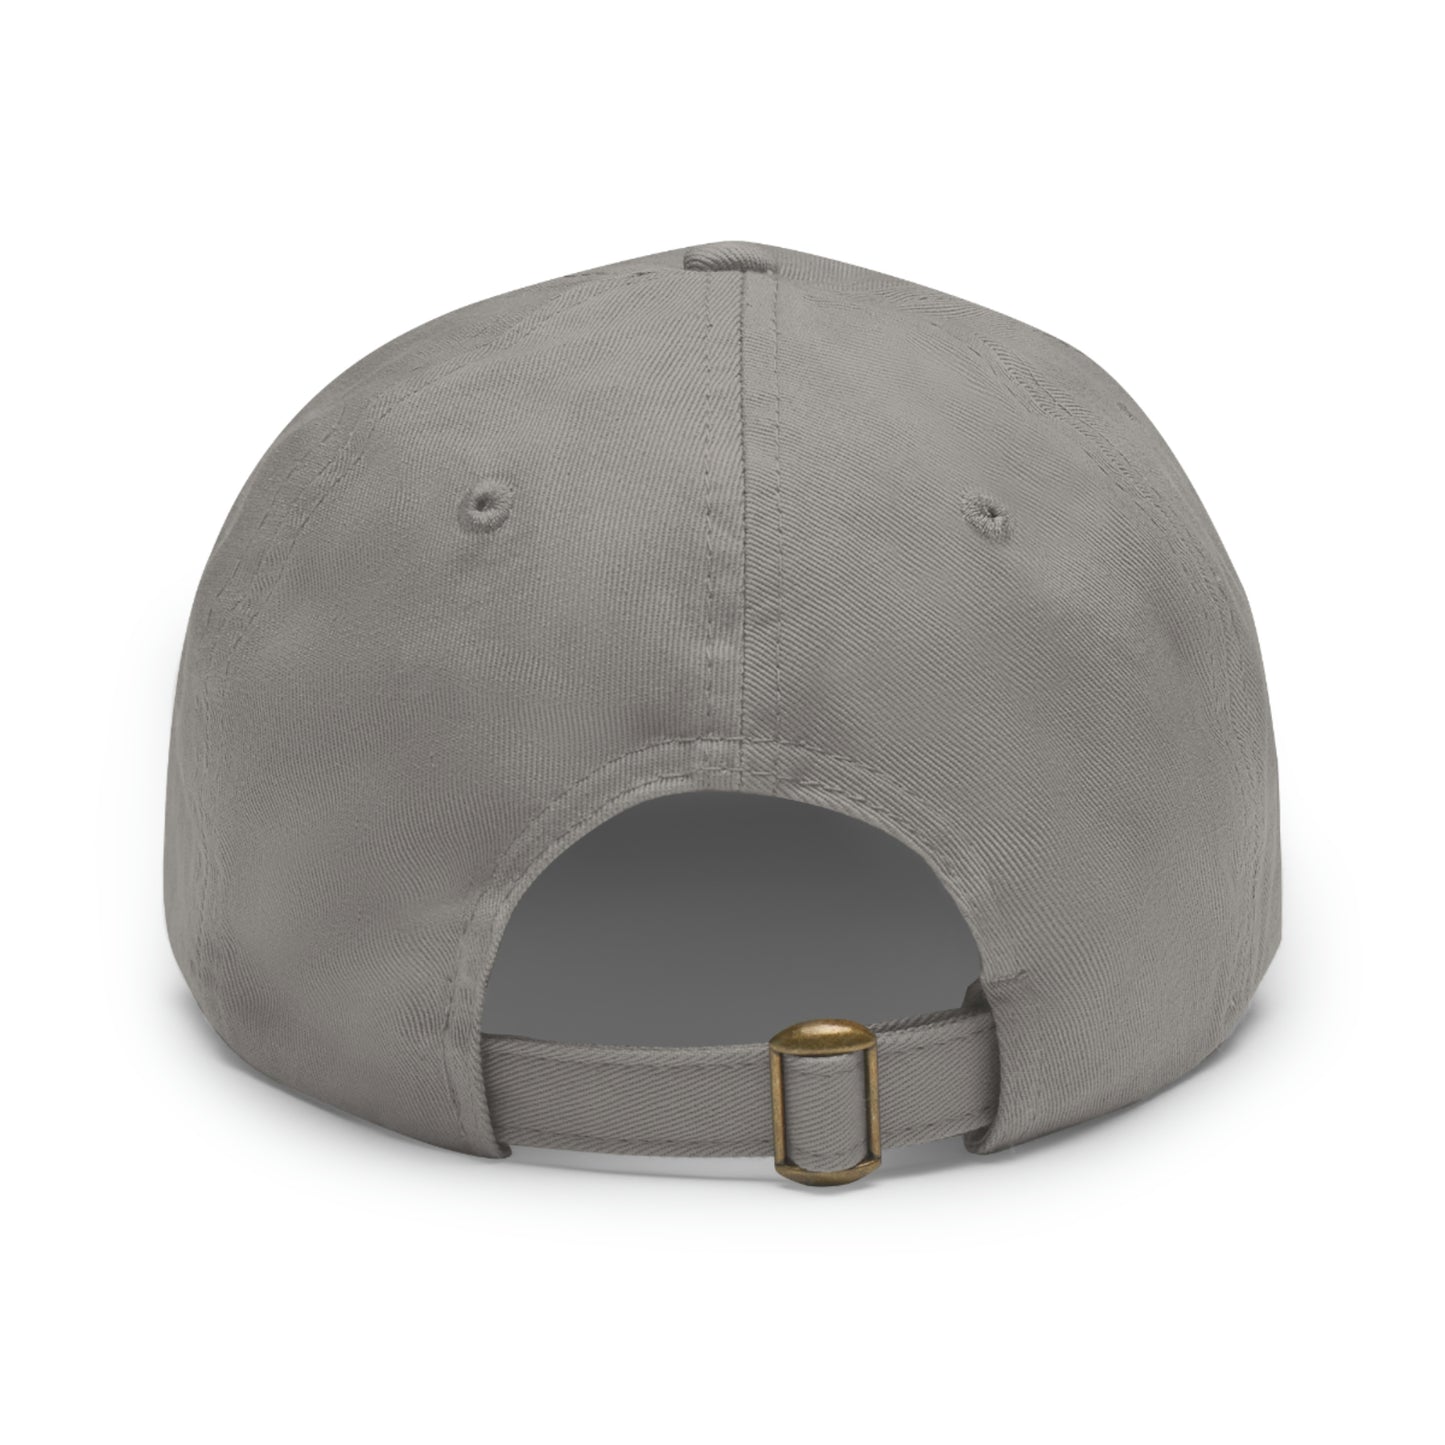 GRUMONH - Dad Hat with Leather Patch